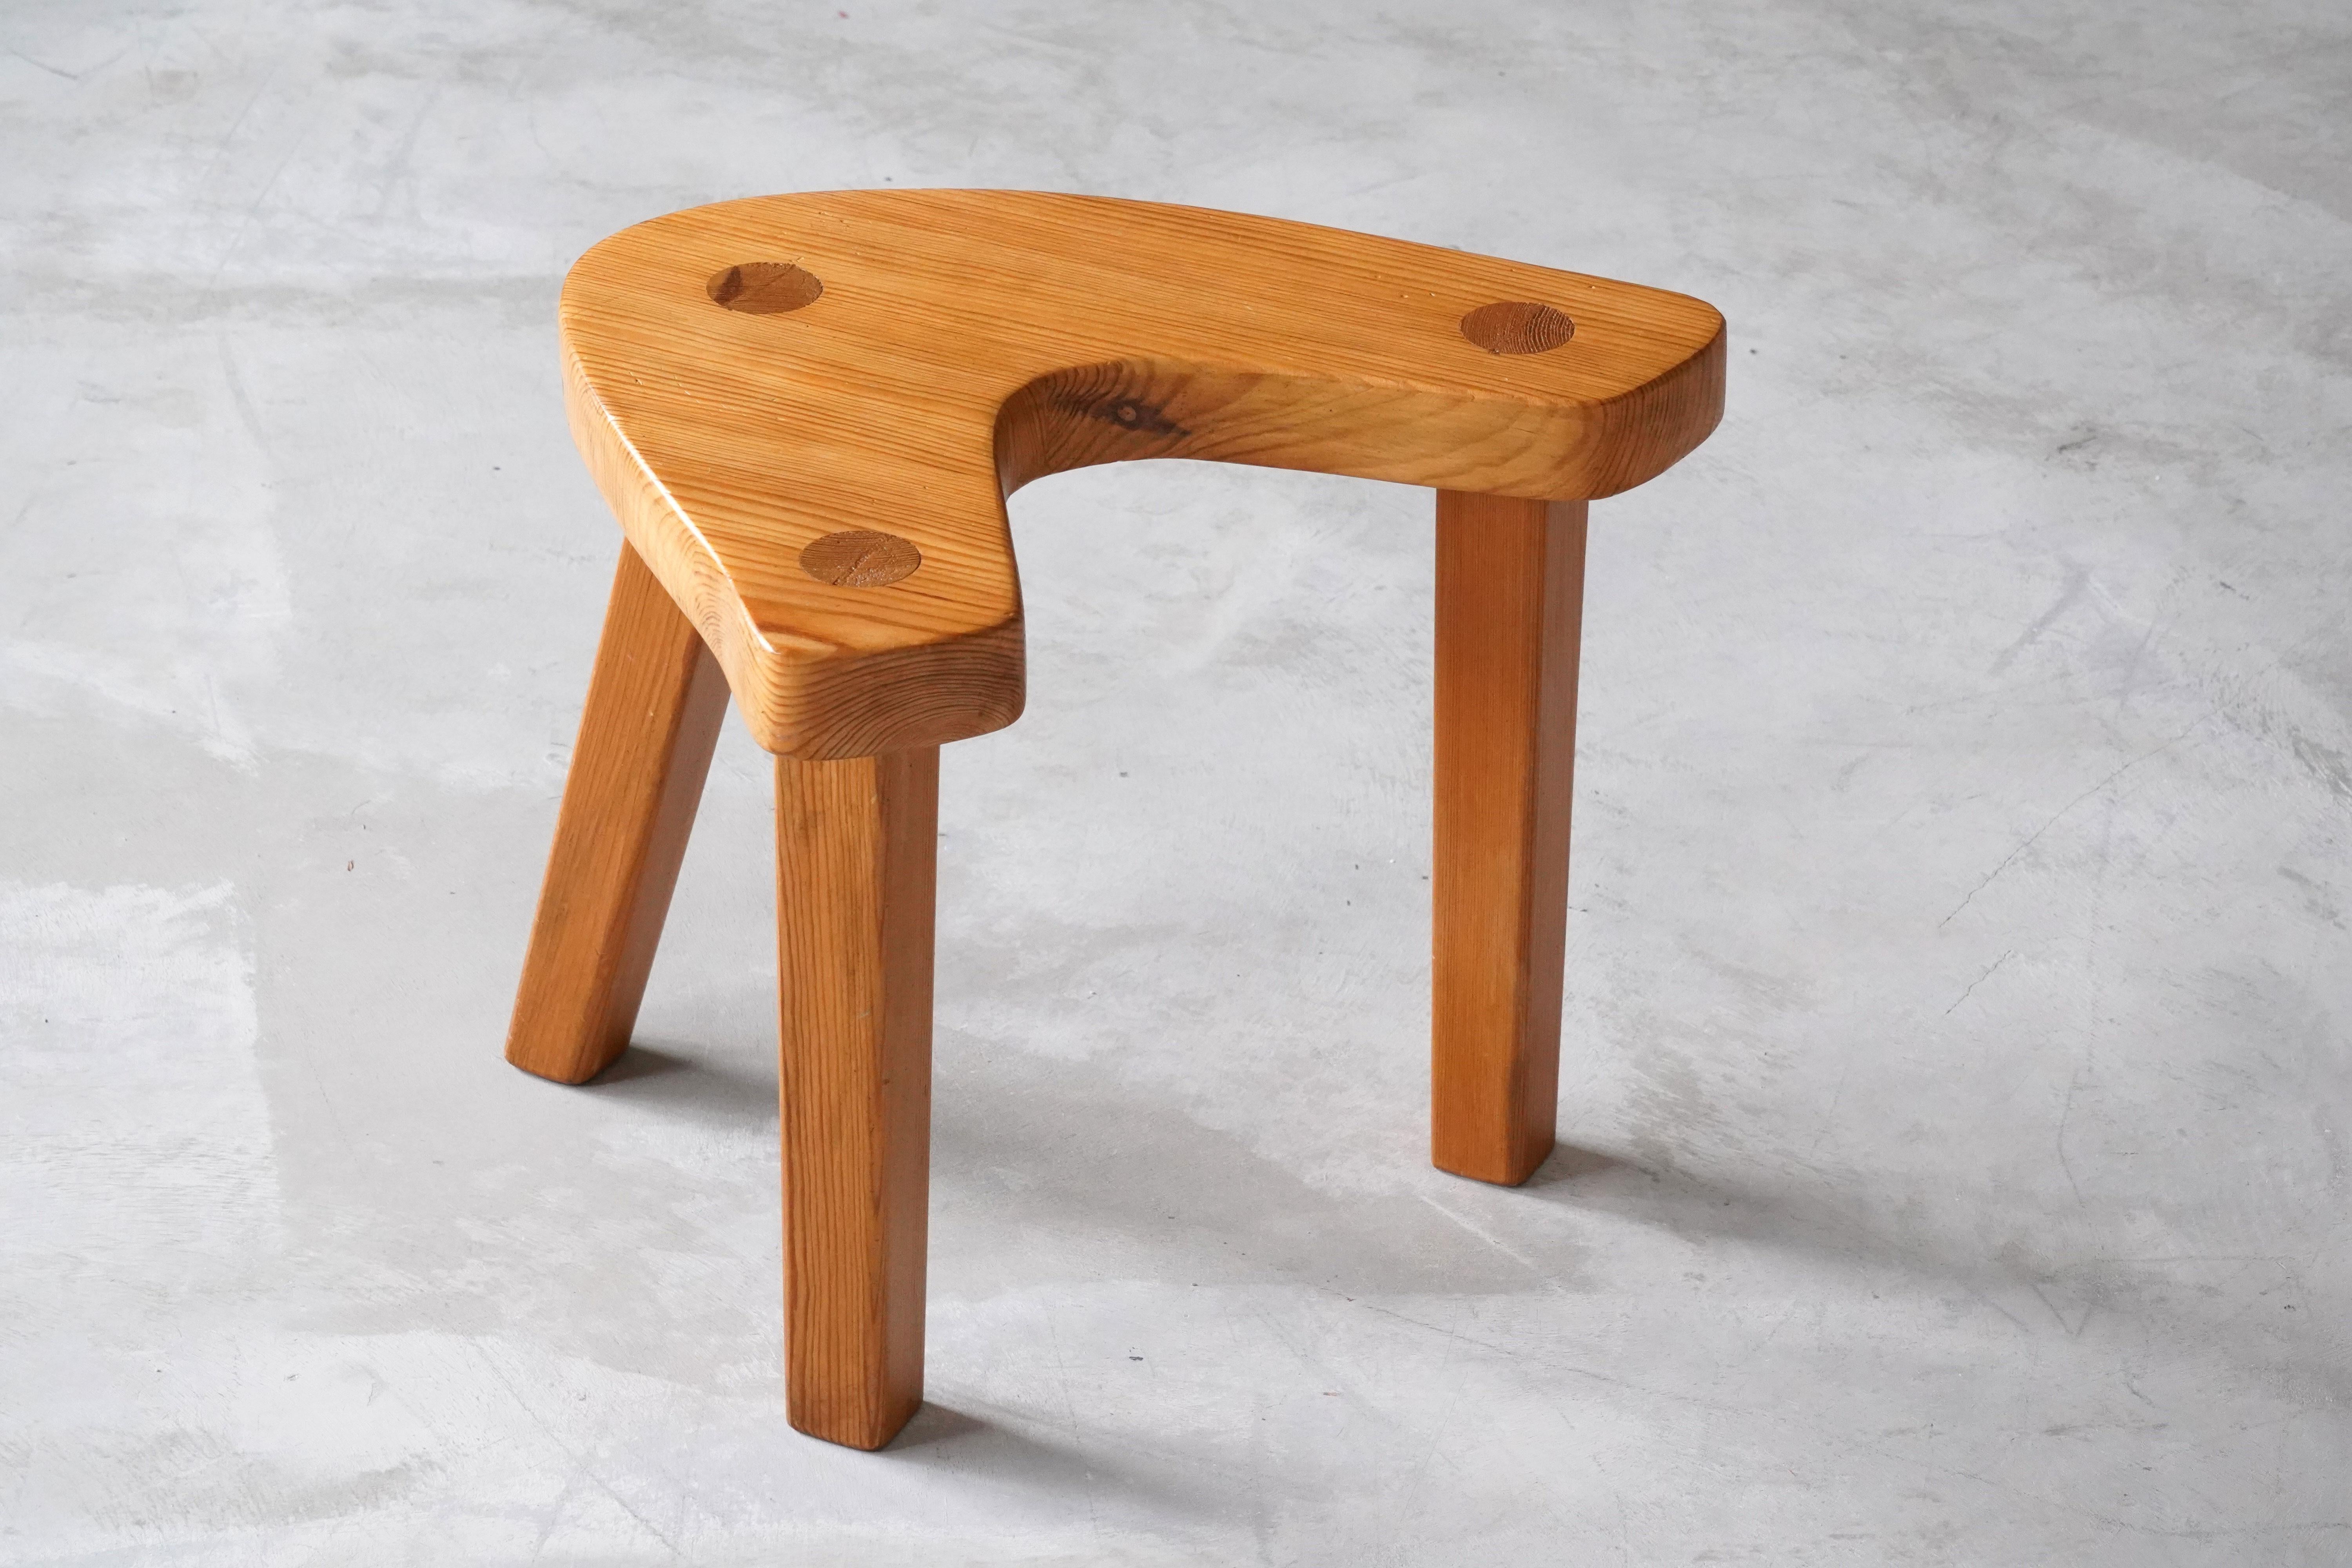 A handcrafted modernist stool or side table. Executed by an unknown designer, 1960s, Sweden. The organically shaped seat is mounted on 3 legs with revealed joinery. 

Other designers of the period include Roland Wilhelmsson, Axel Einar Hjorth,